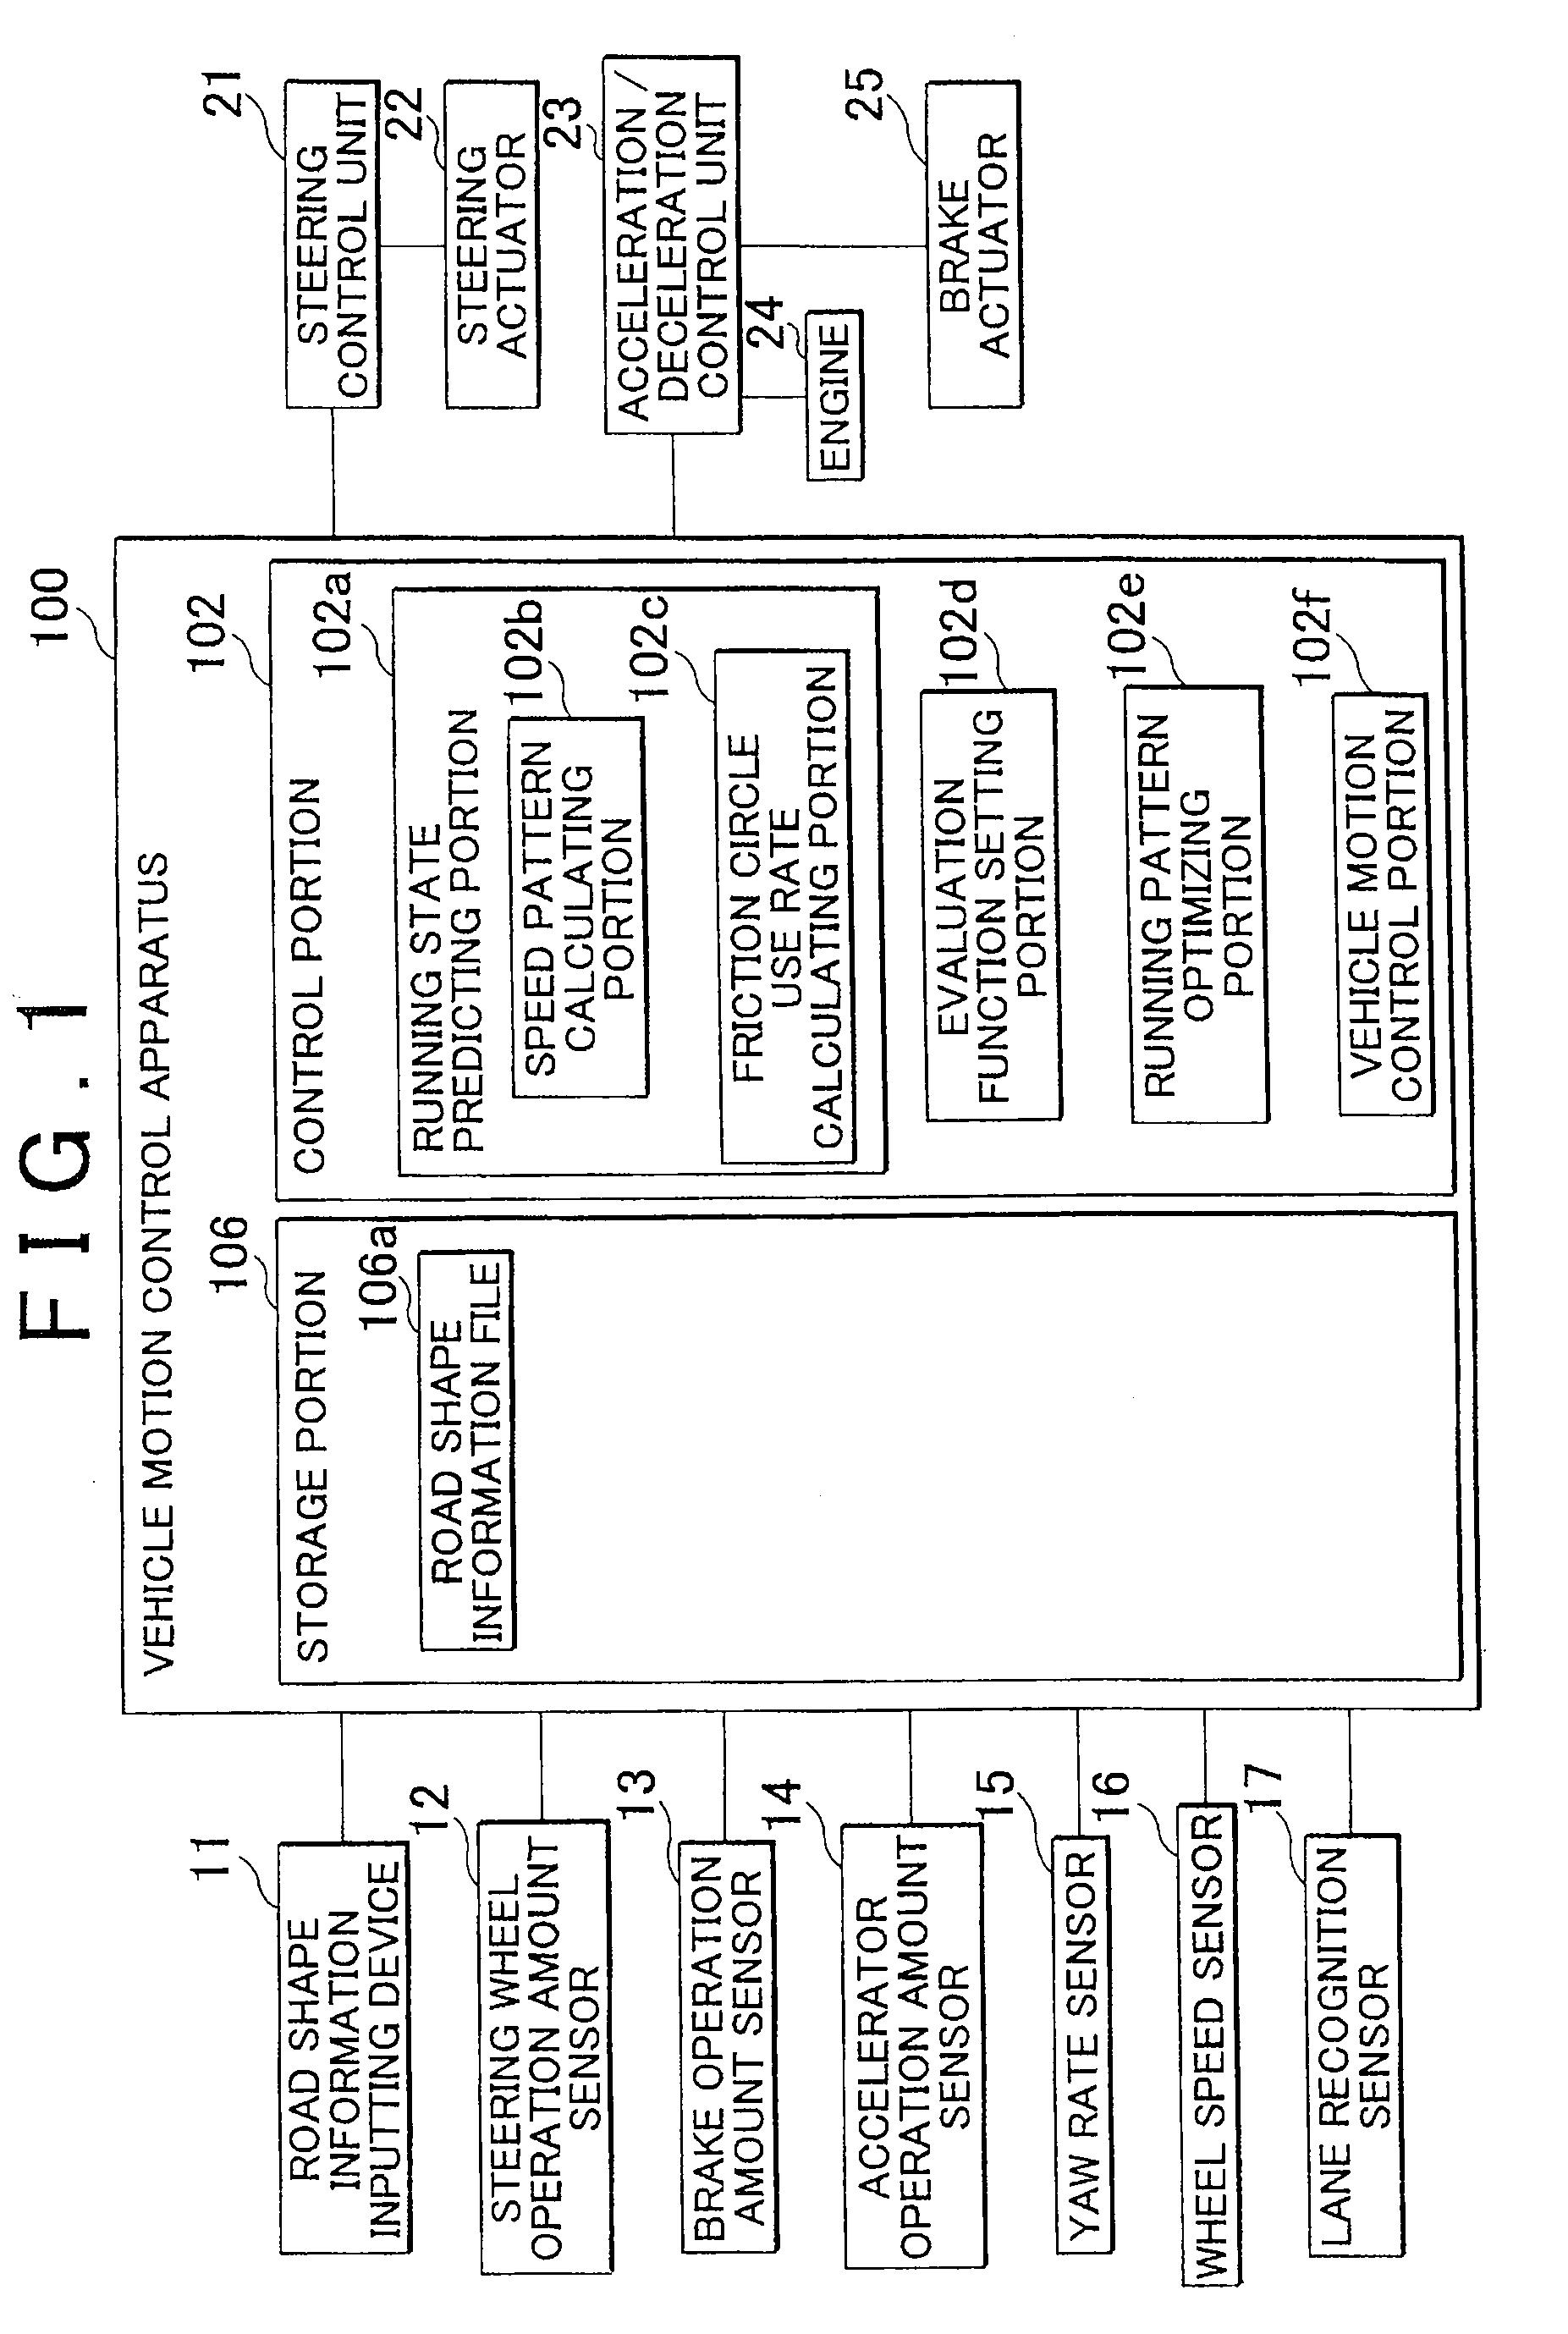 Running pattern calculating apparatus and running pattern calculating method